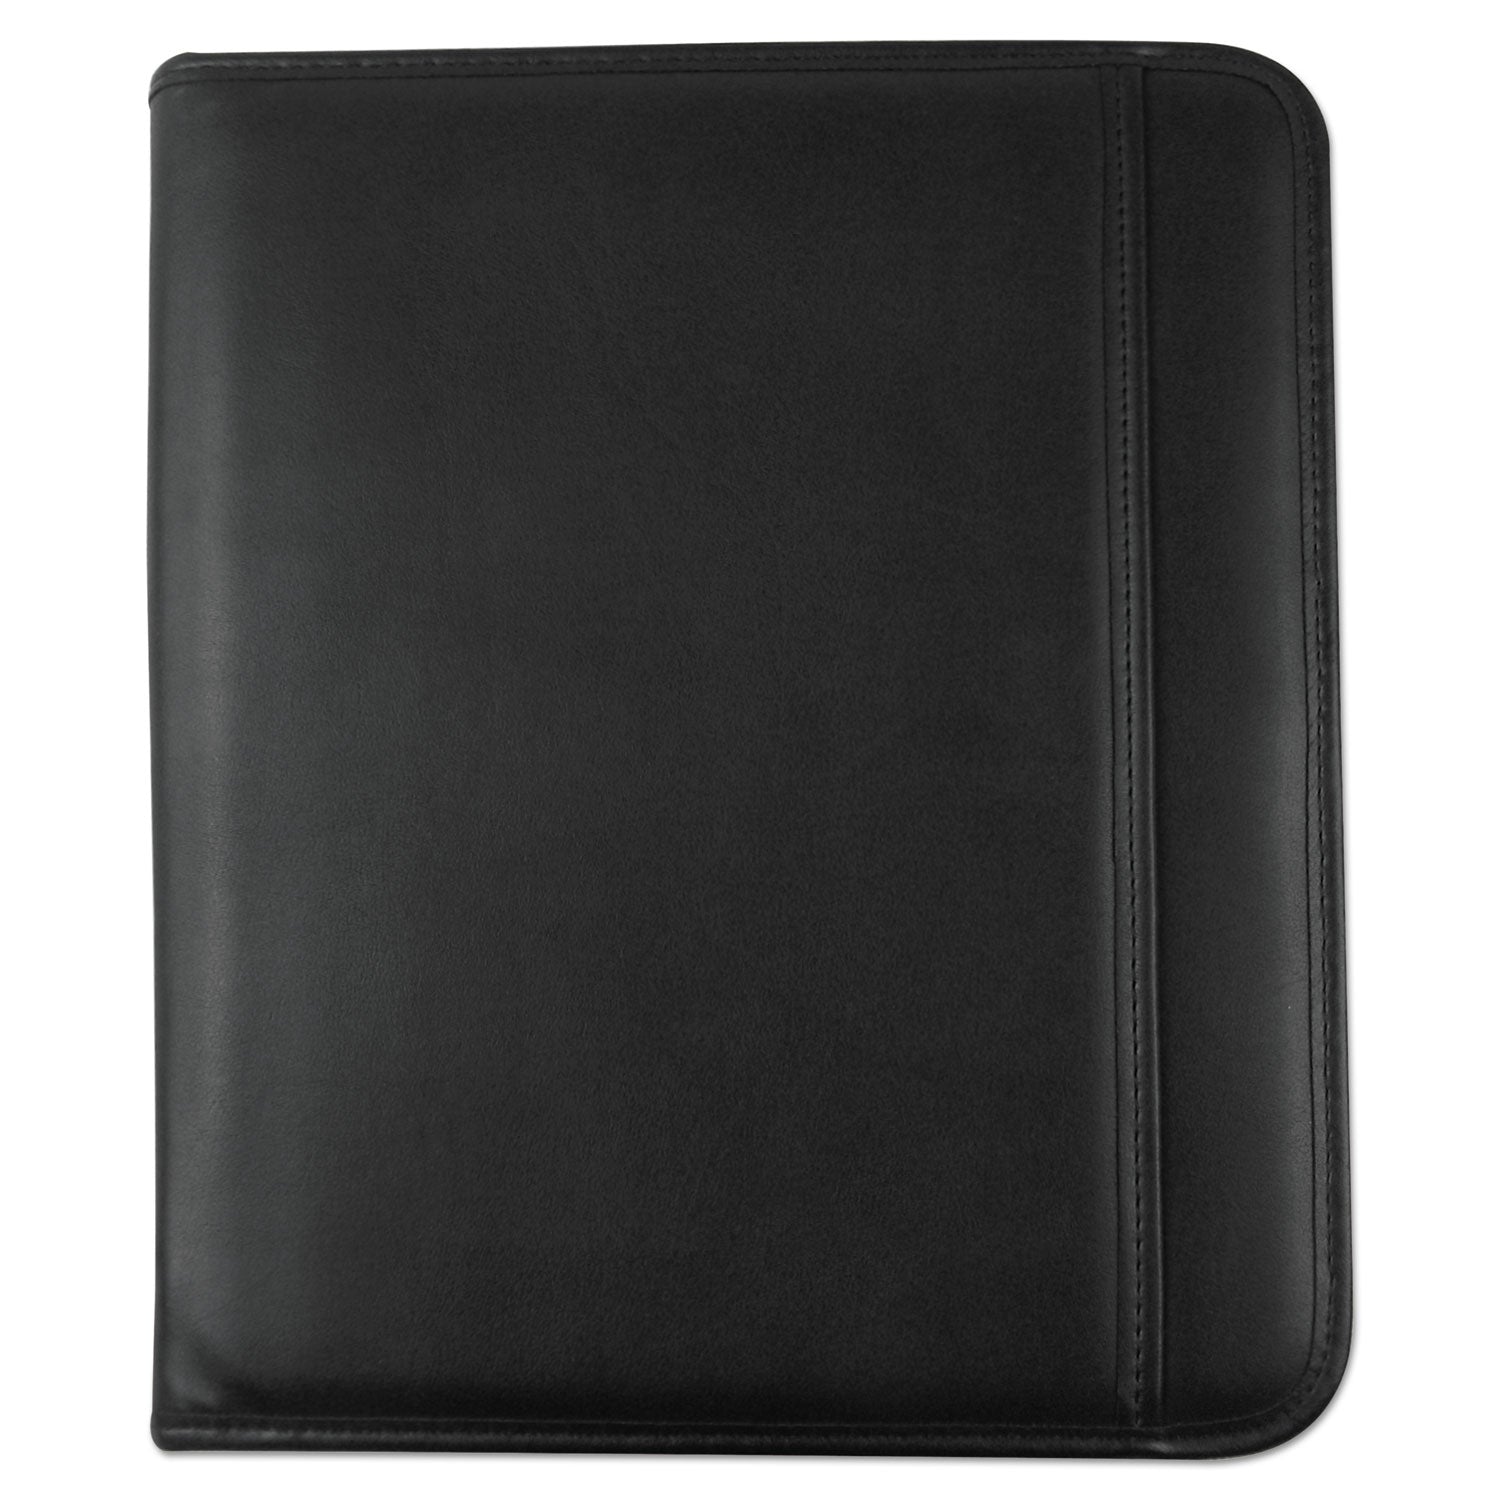 leather-textured-zippered-padfolio-with-tablet-pocket-10-3-4-x-13-1-8-black_unv32665 - 1